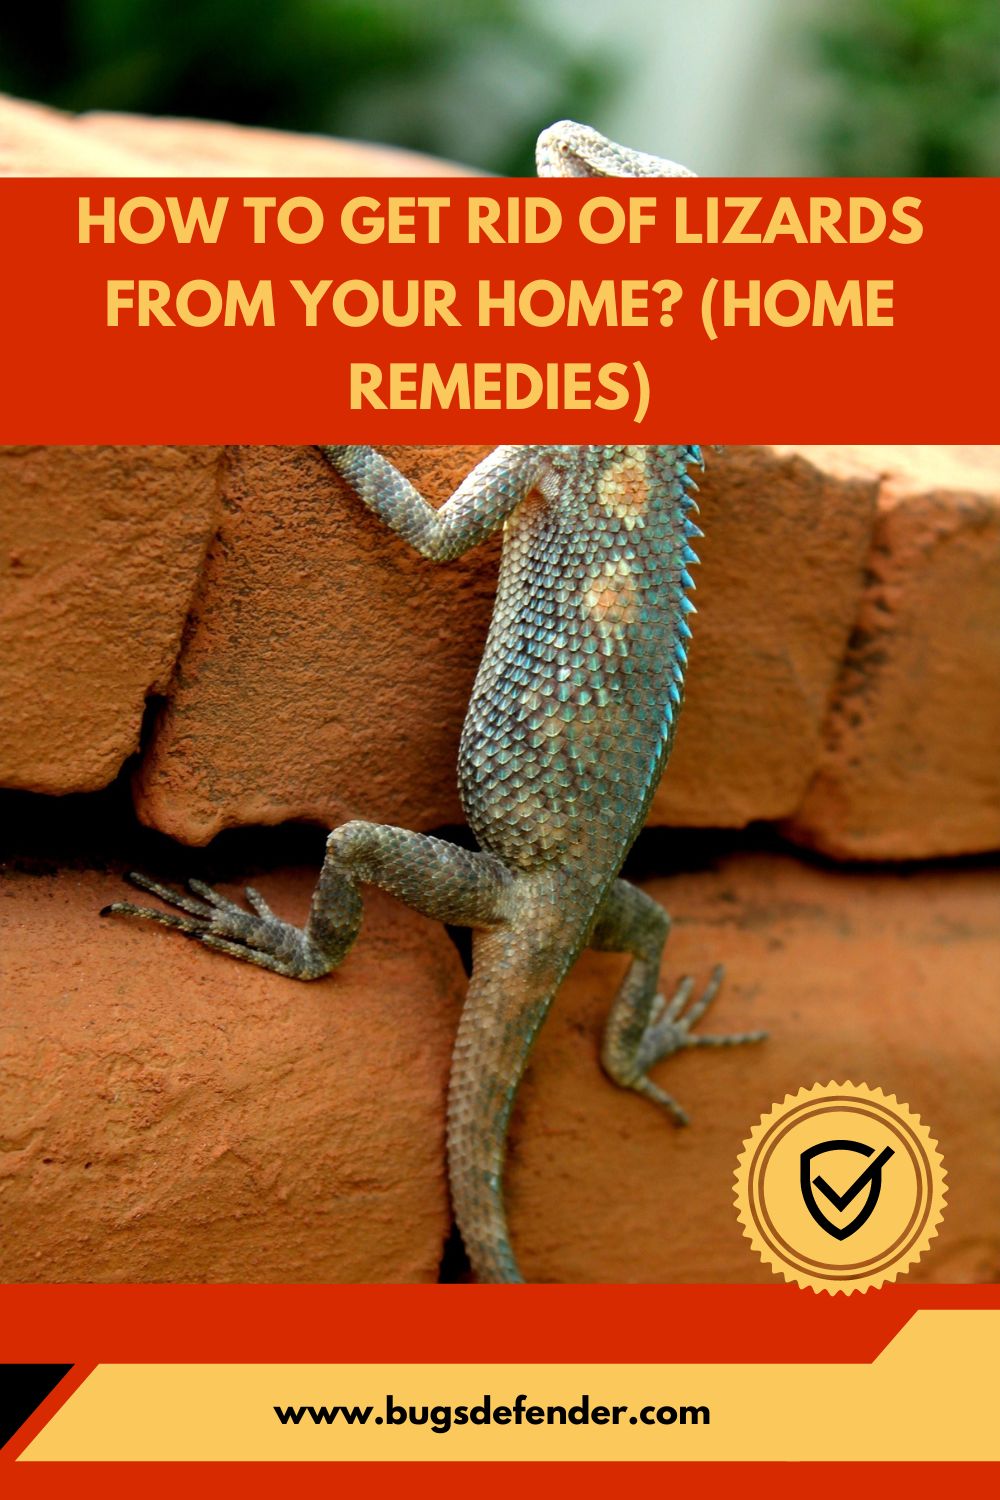 How To Get Rid Of Lizards From Your Home pin2